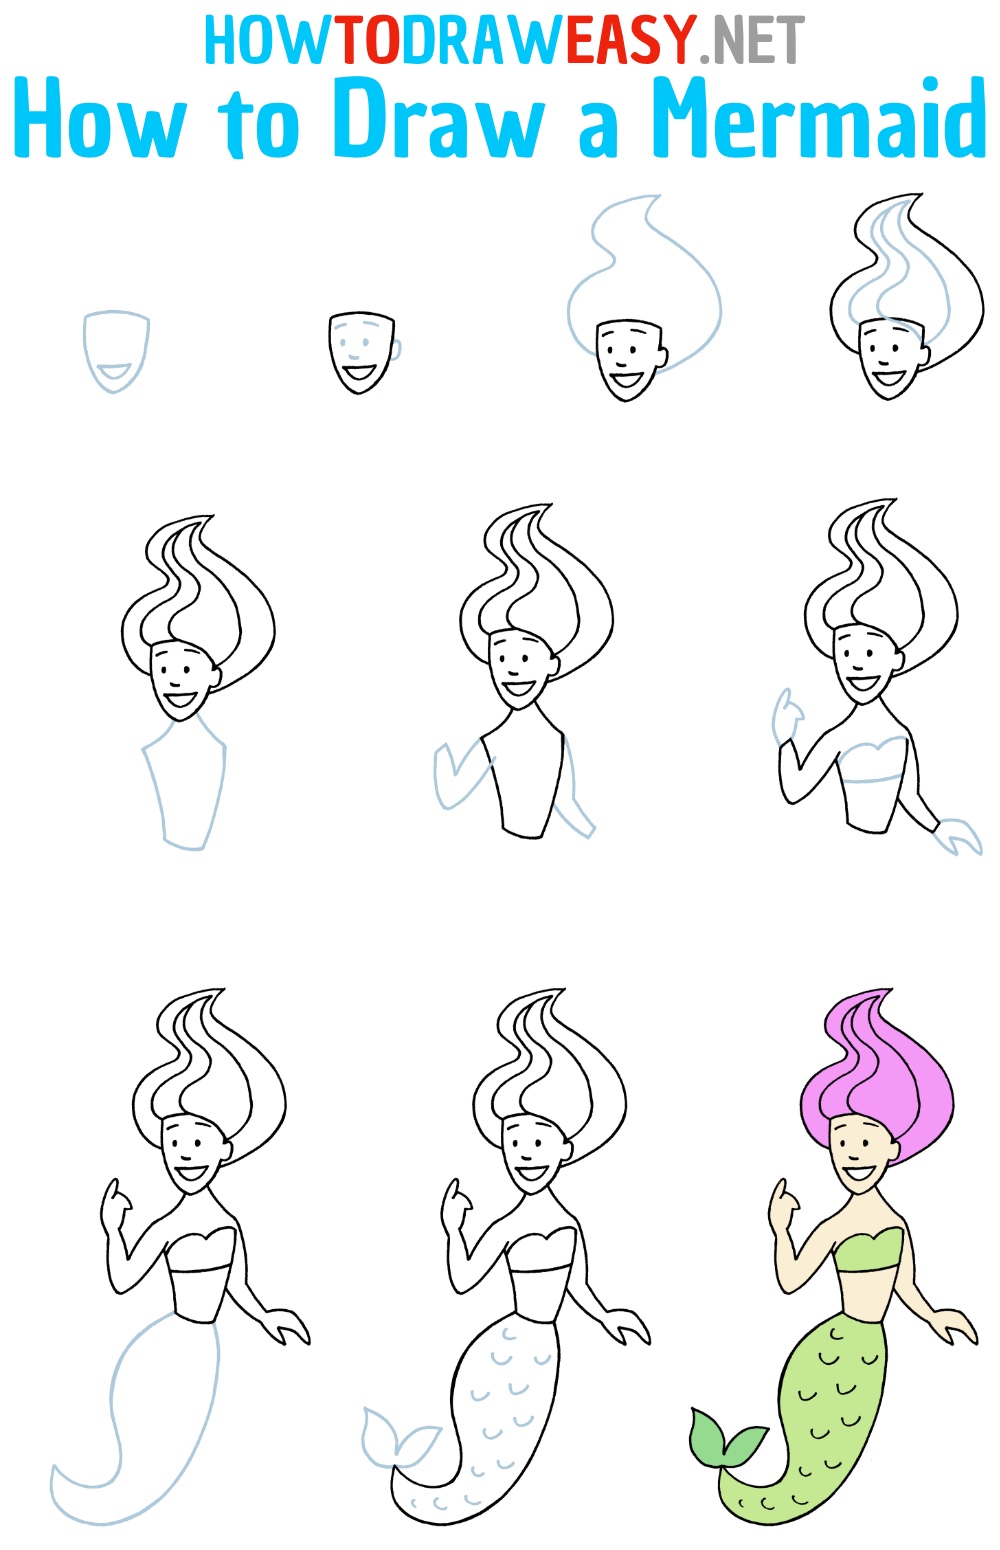 How to Draw a Mermaid Step by Step